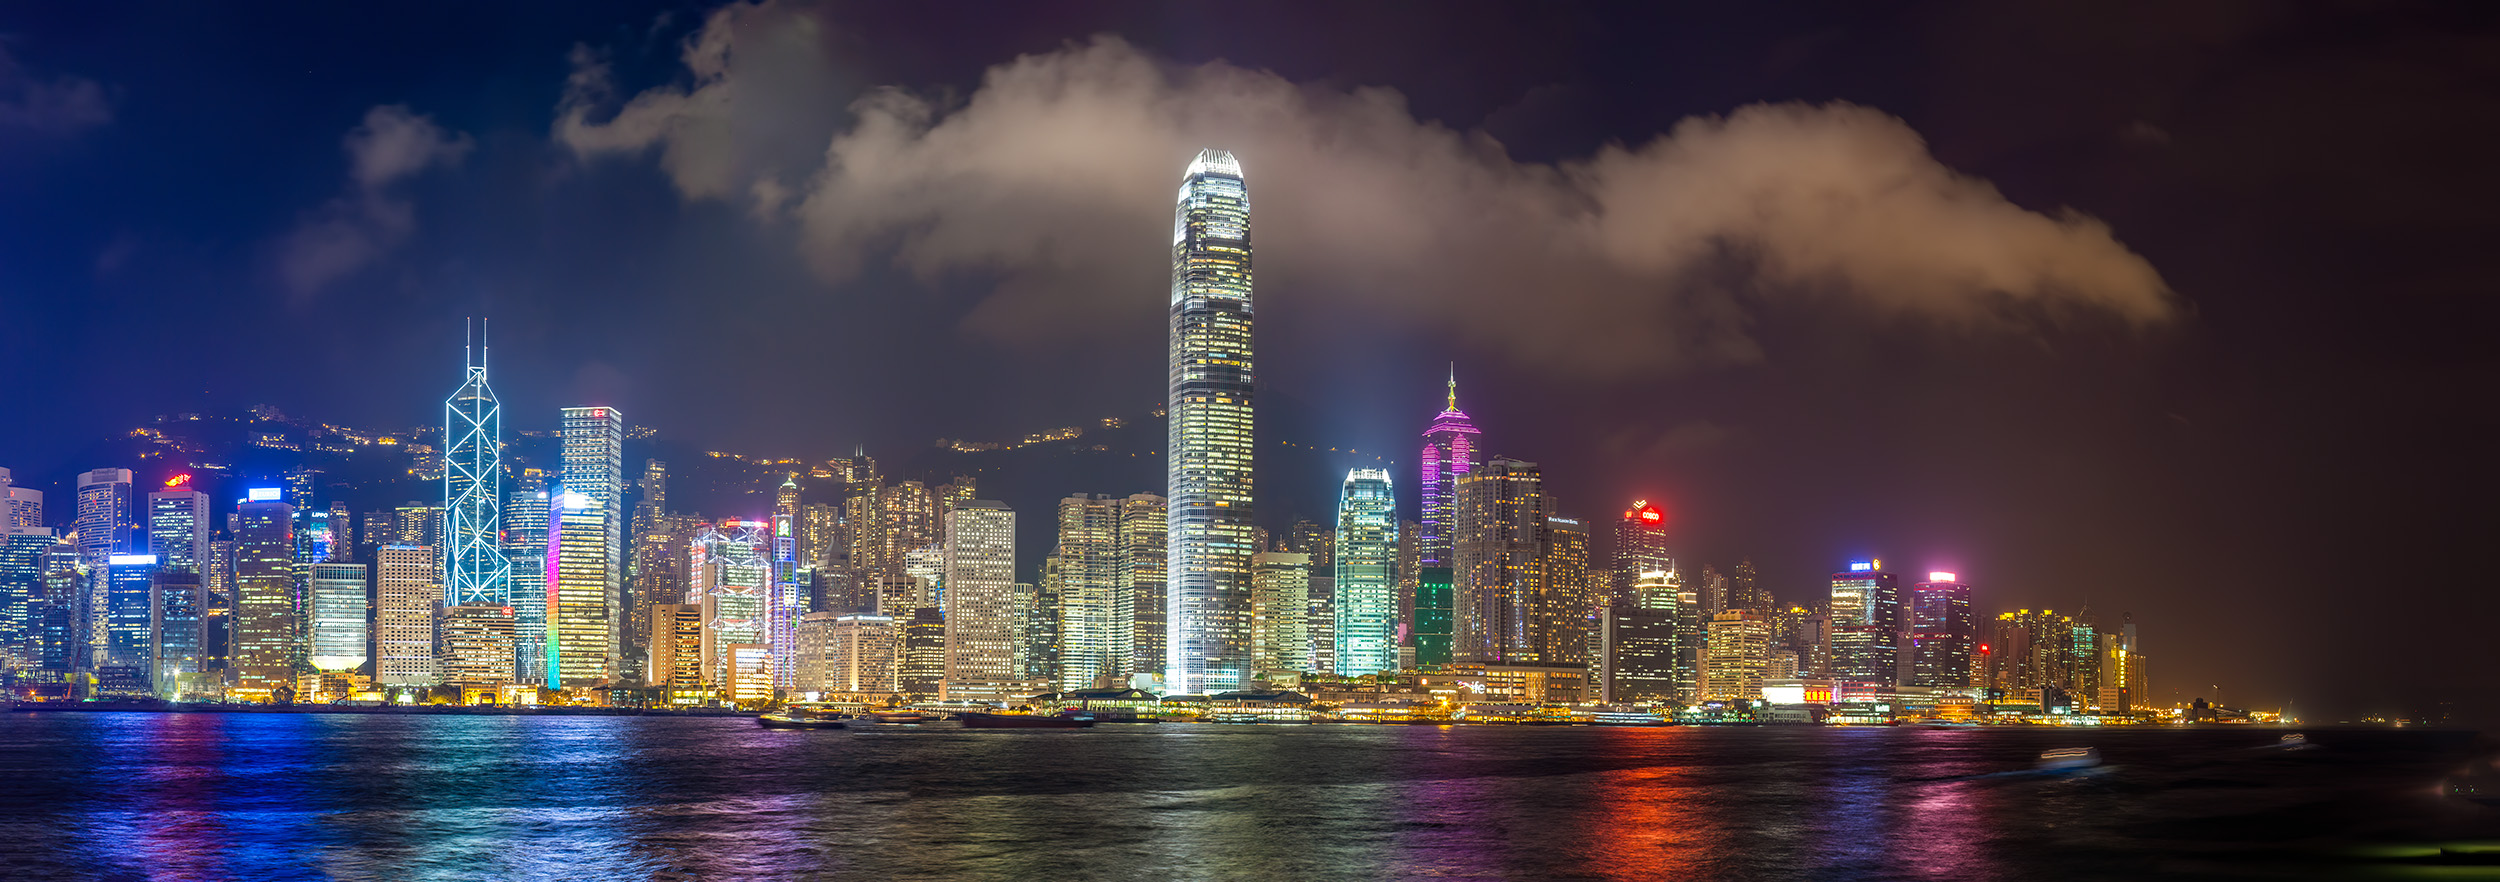 This panoramic image, captured from Kowloon, Hong Kong, unveils a dazzling spectacle. The city's skyscrapers on Hong Kong Island...